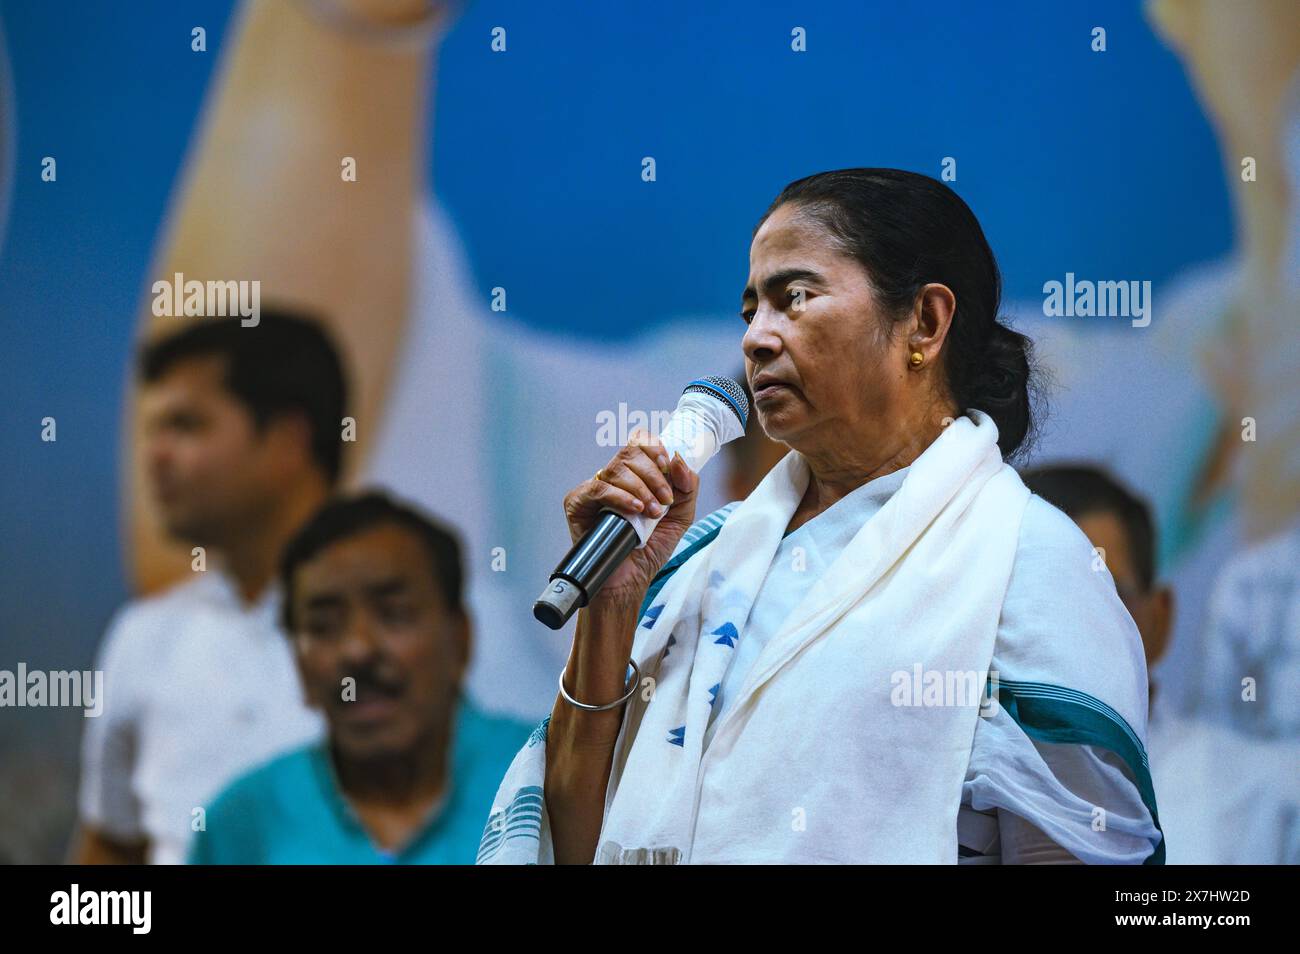 West Bengal's Chief Minister Mamata Banerjee, is the only female chief minister in India now. She is also the leader of the Trinamool Congress (TMC) party who served twice as Minister of Railways and multiple times as a Union Cabinet Minister. The CM is seen speaking at a public meeting during an election campaign rally in support of Indian MP Mahua Moitra at the Harichand Guruchand Stadium. Tehatta, West Bengal. India. Stock Photo